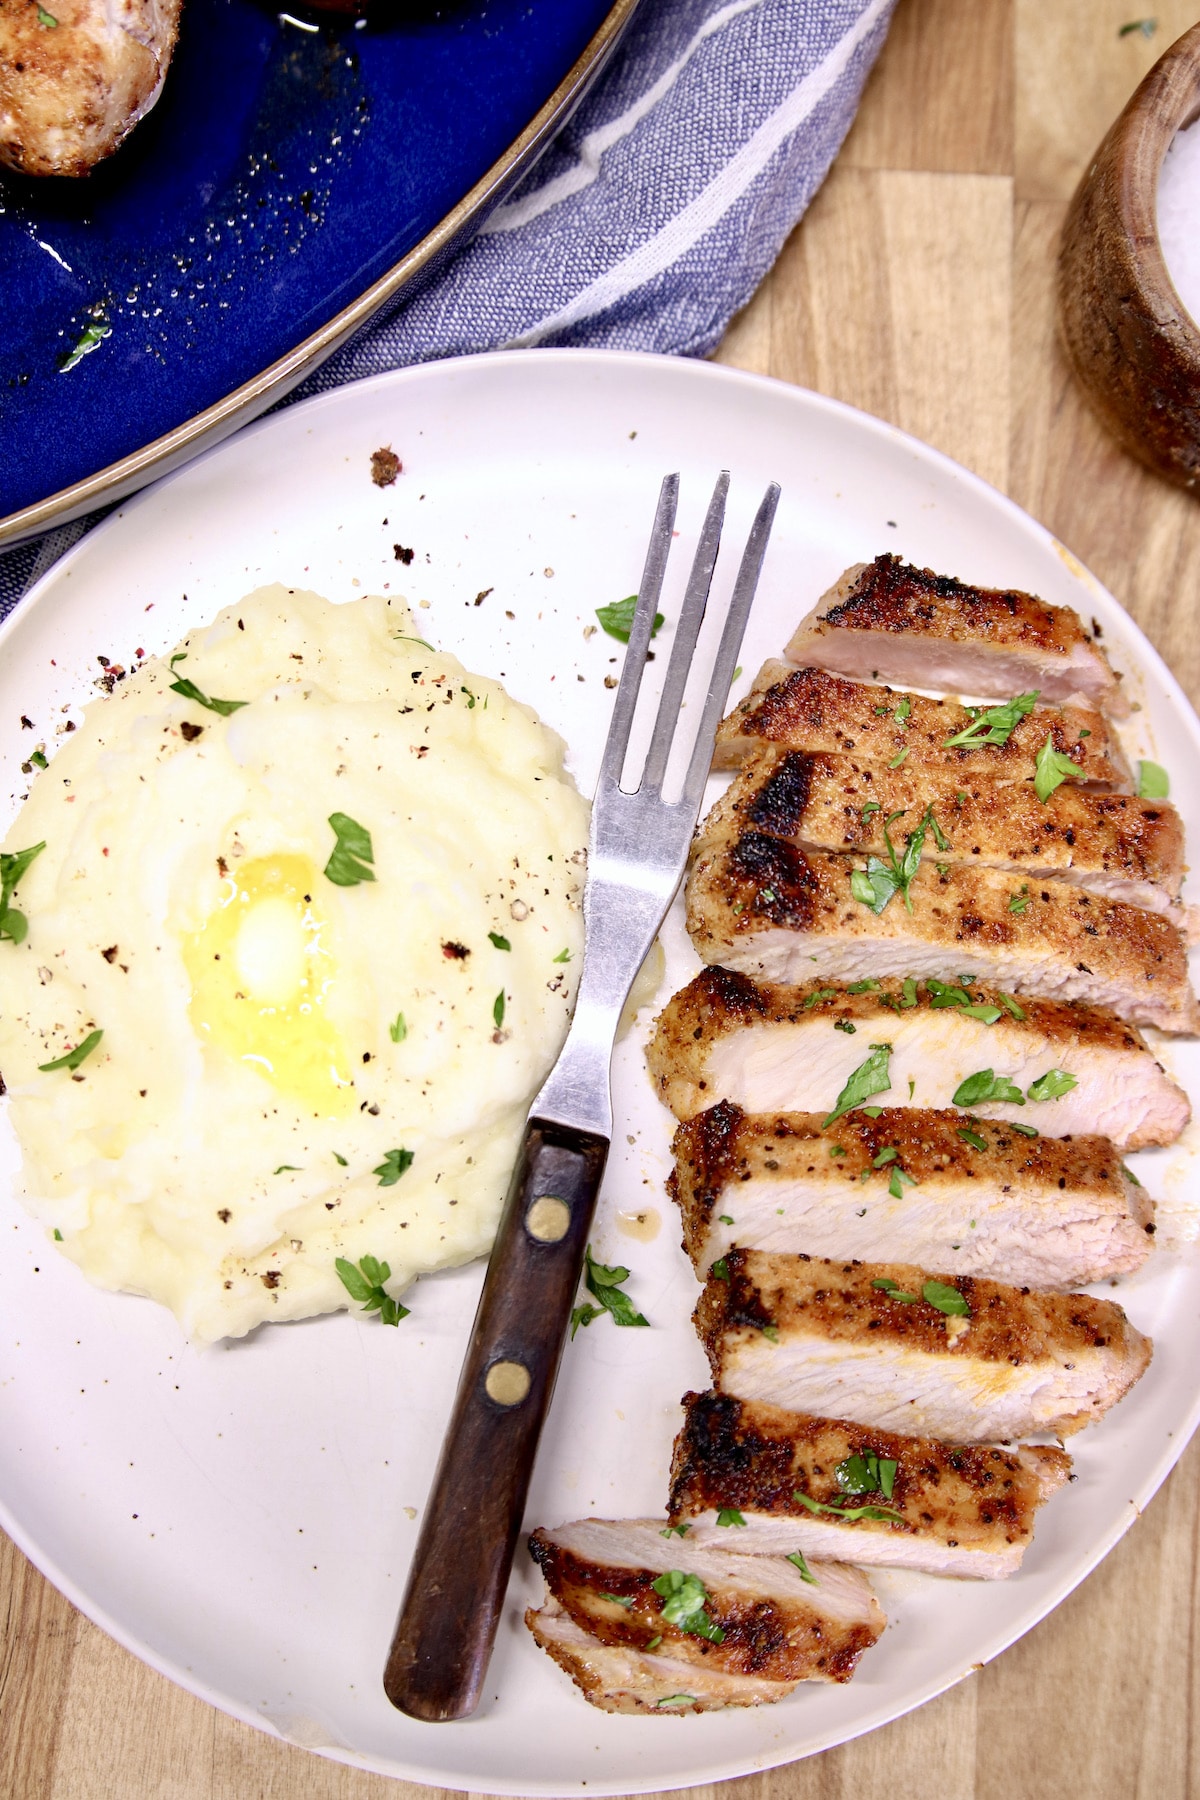 Sliced pork chop on a plate with mashed potatoes.